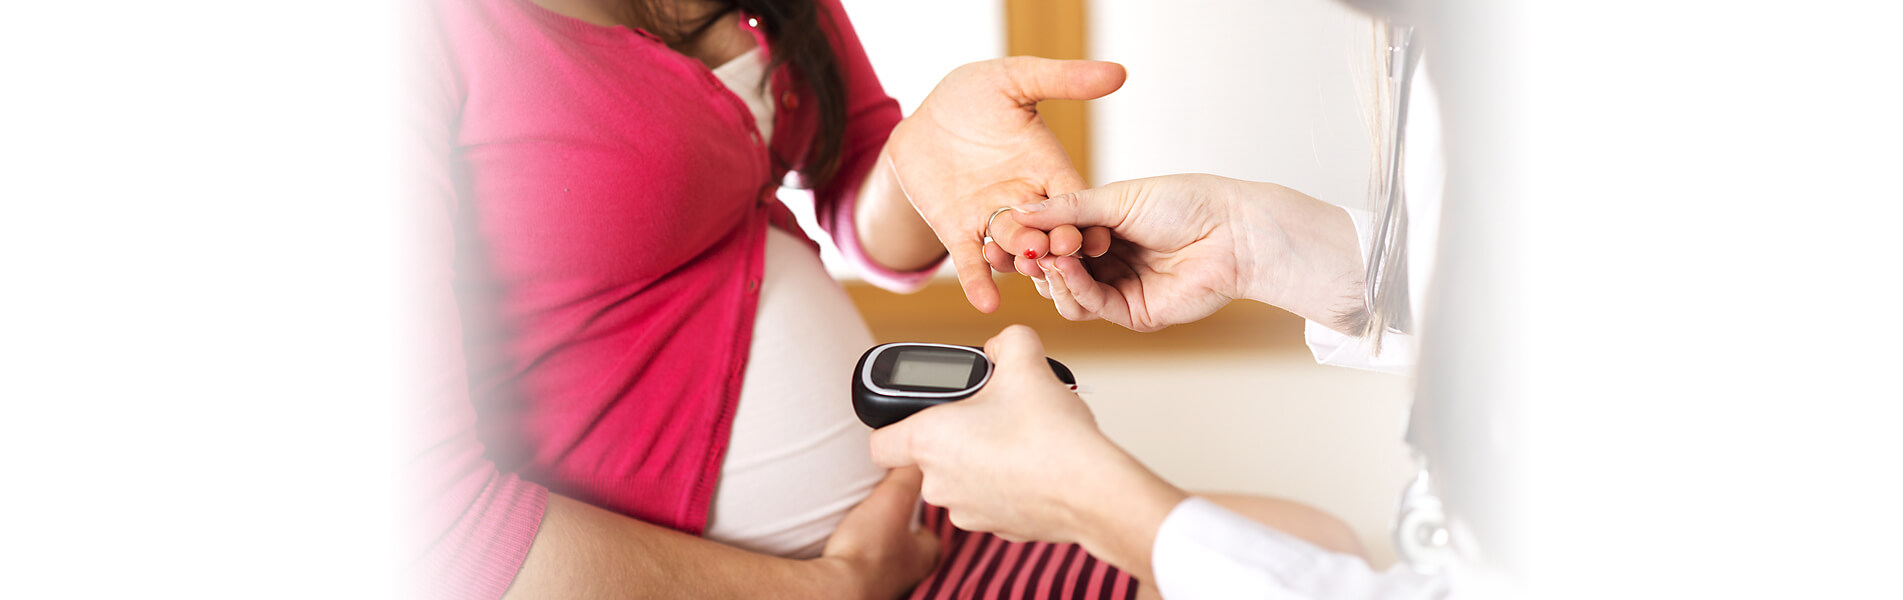 Image of pregnant woman having finger prick test to check blood glucose level